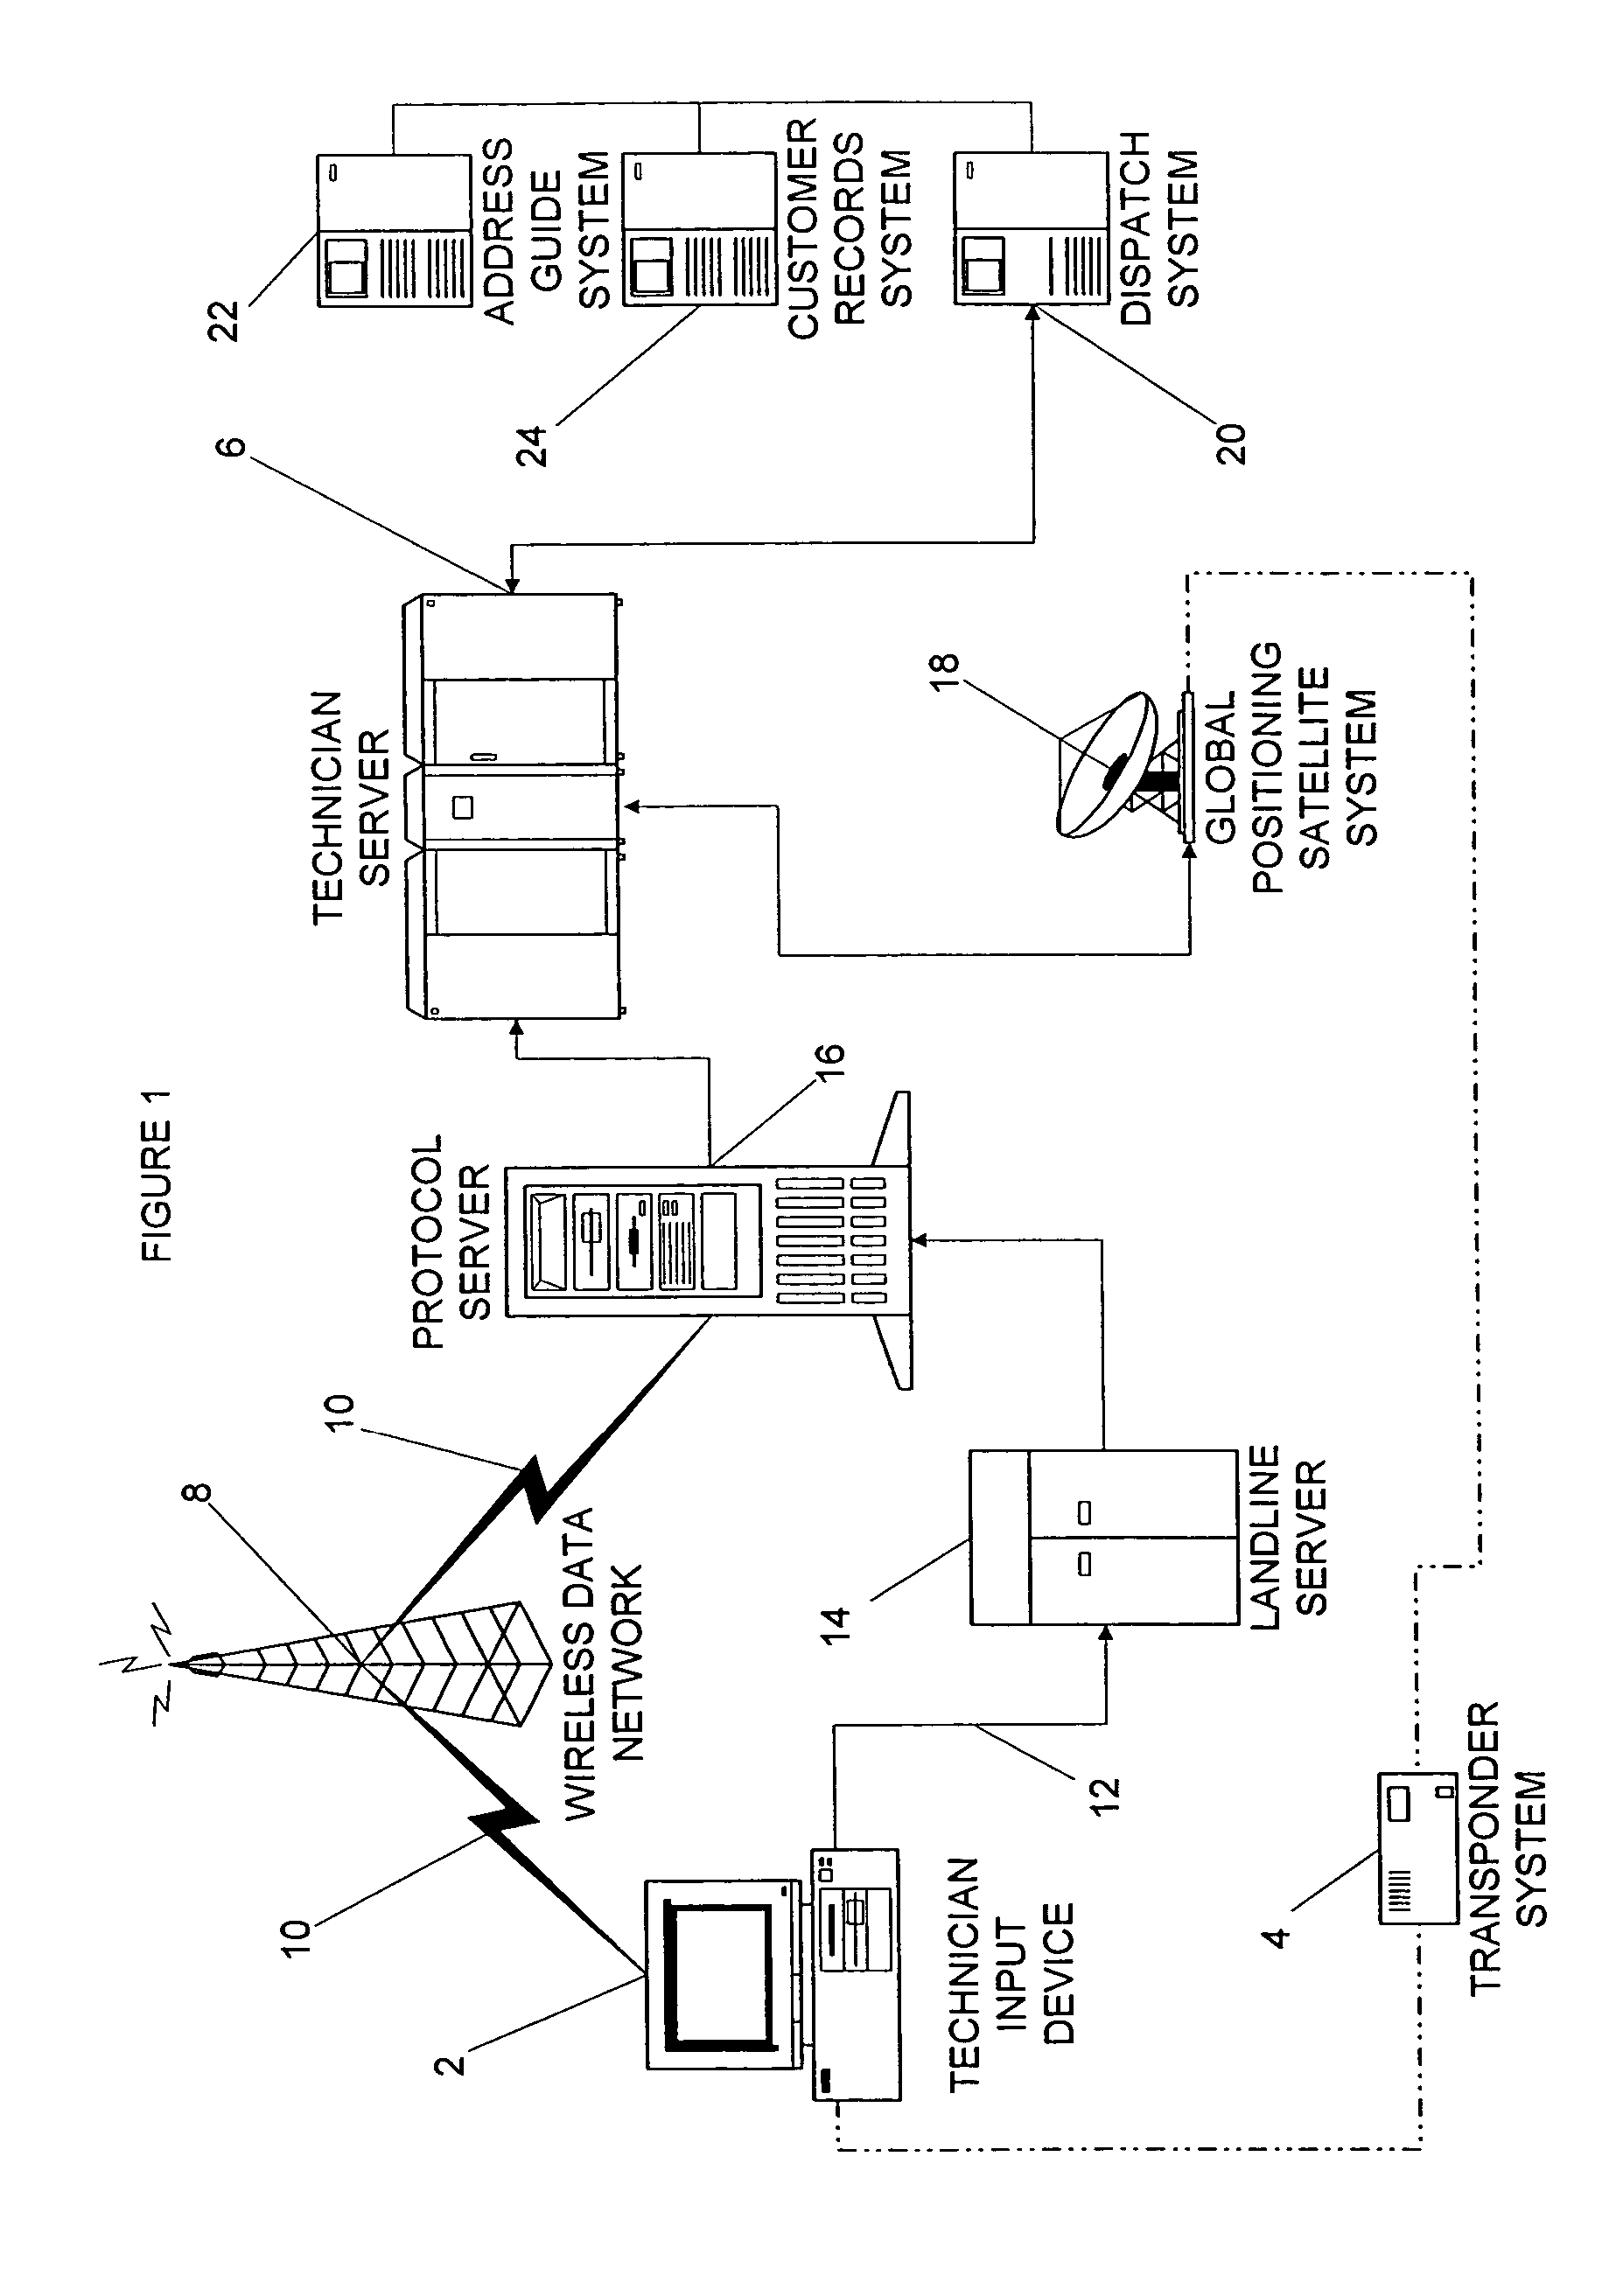 Methods and systems for routing travel between origin and destination service locations using global satellite positioning